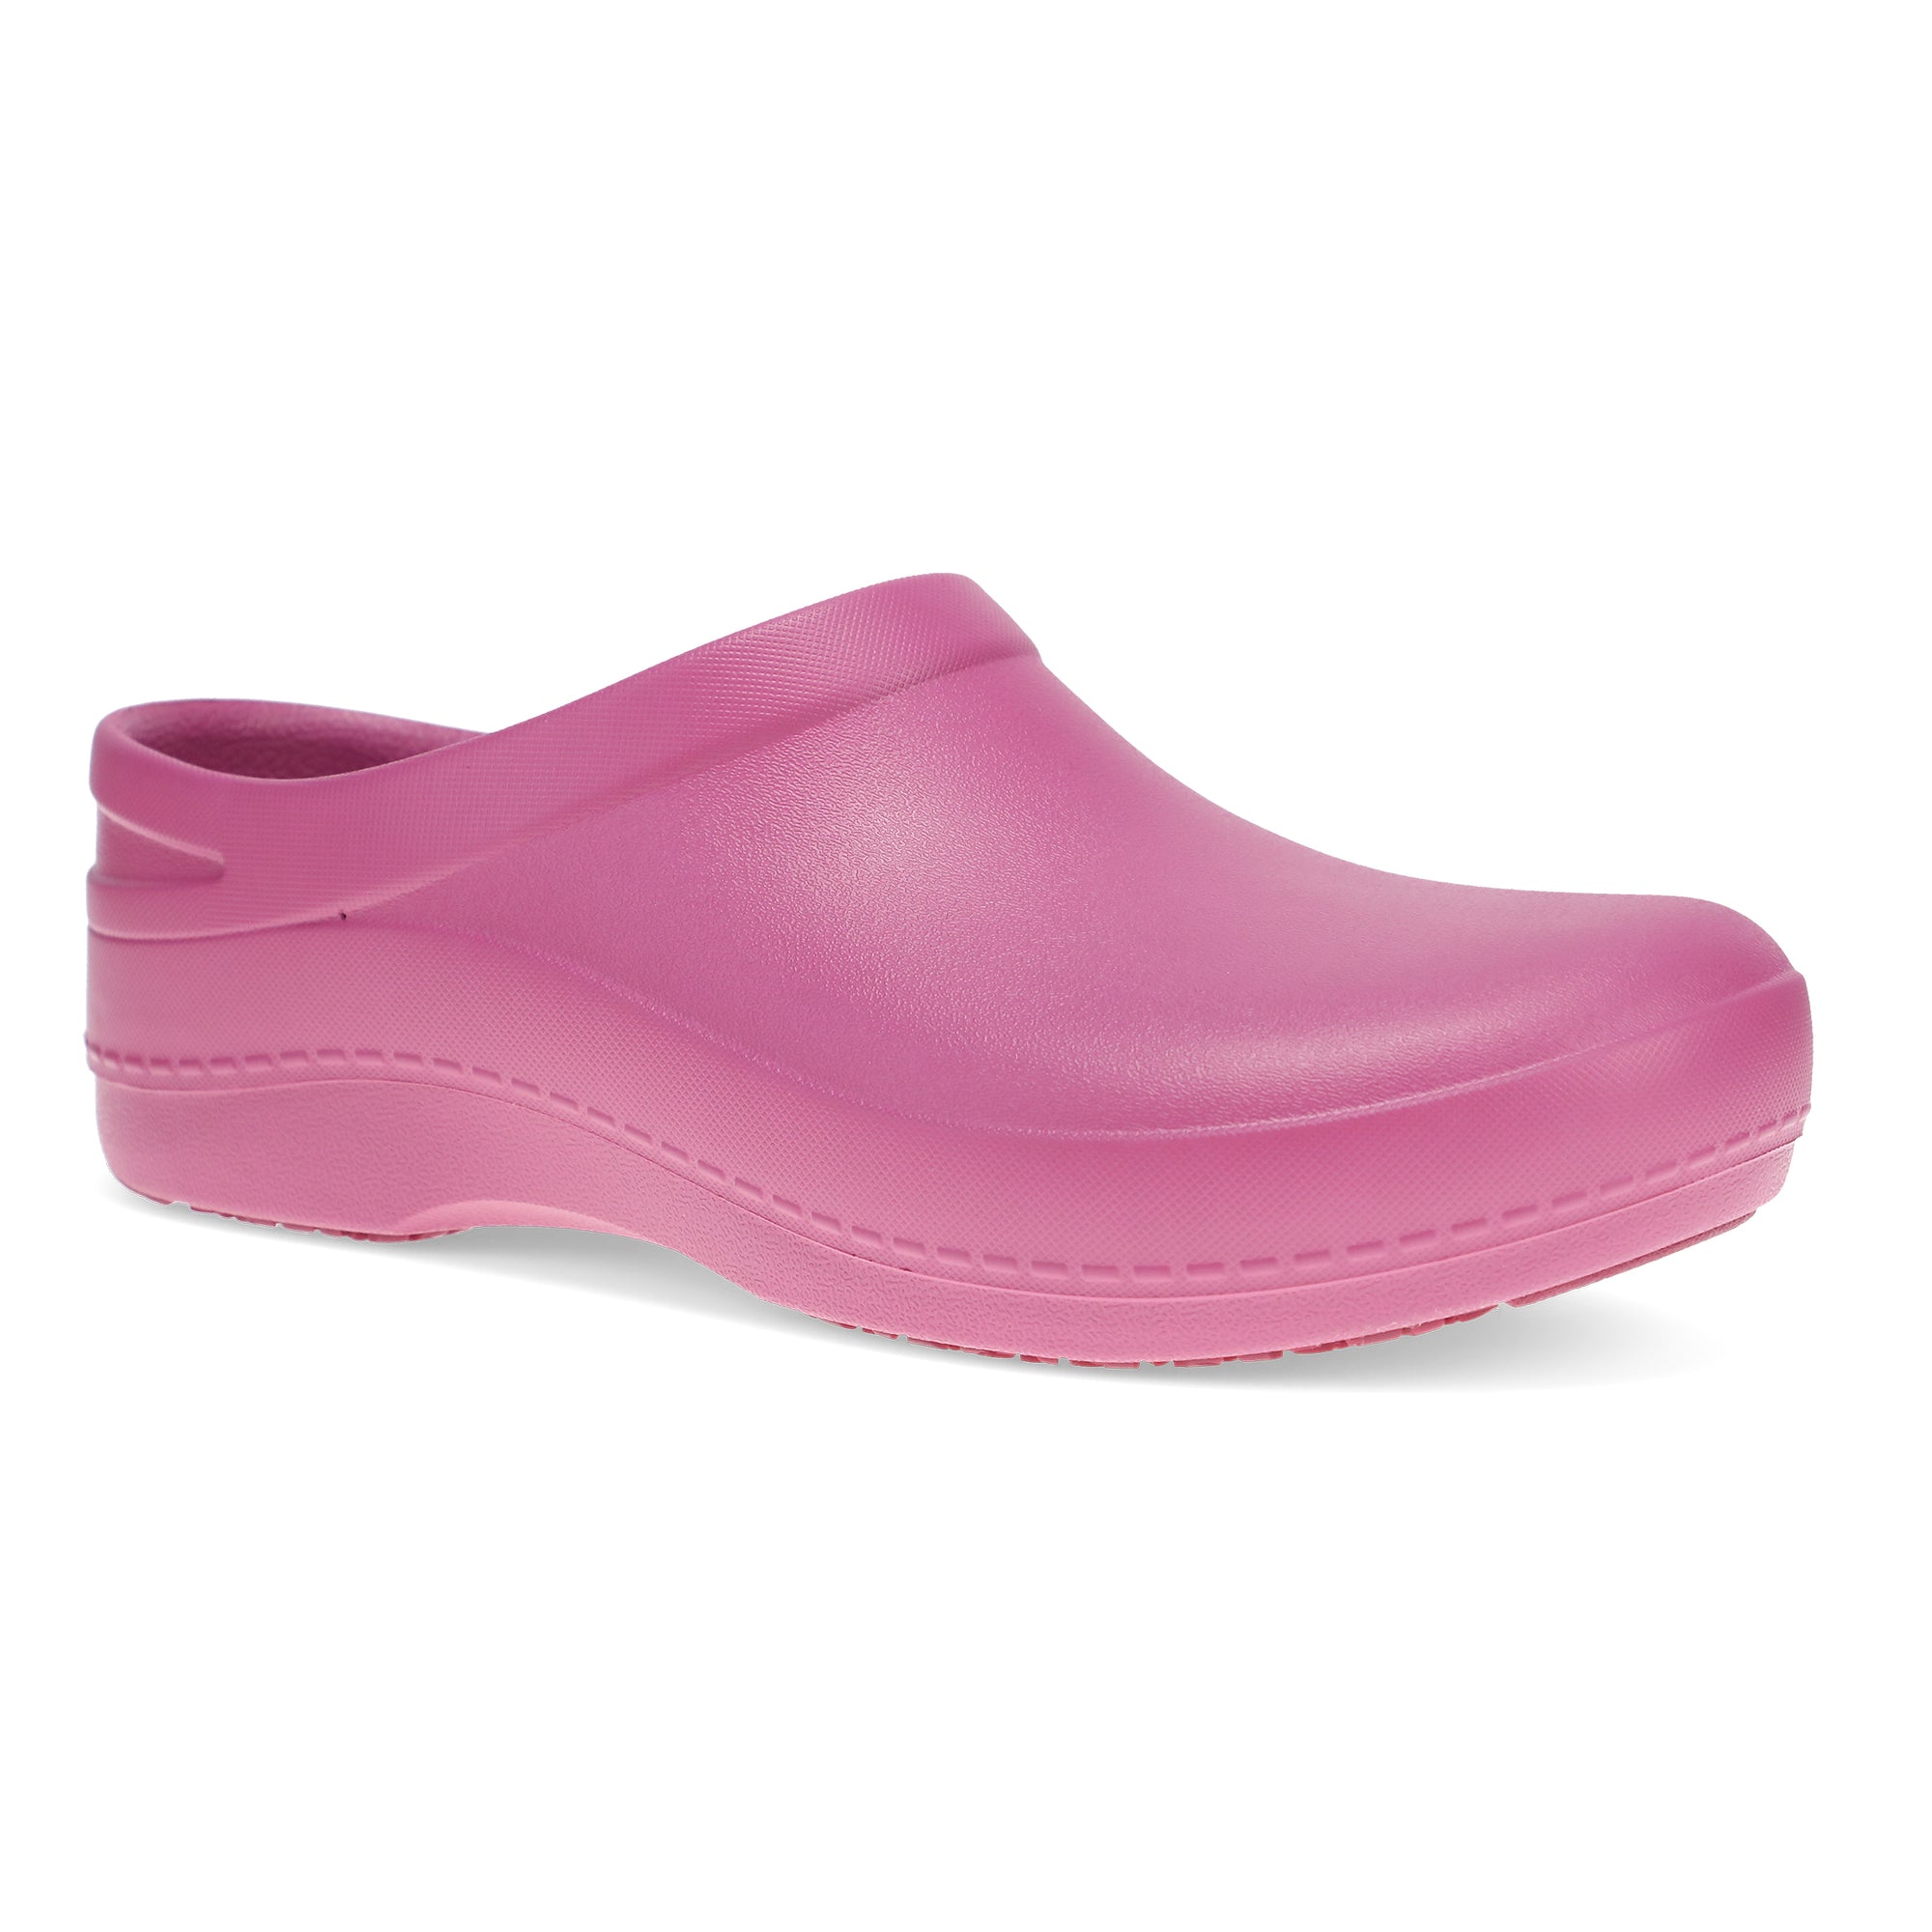 Product view of Kaci Pink molded clog.